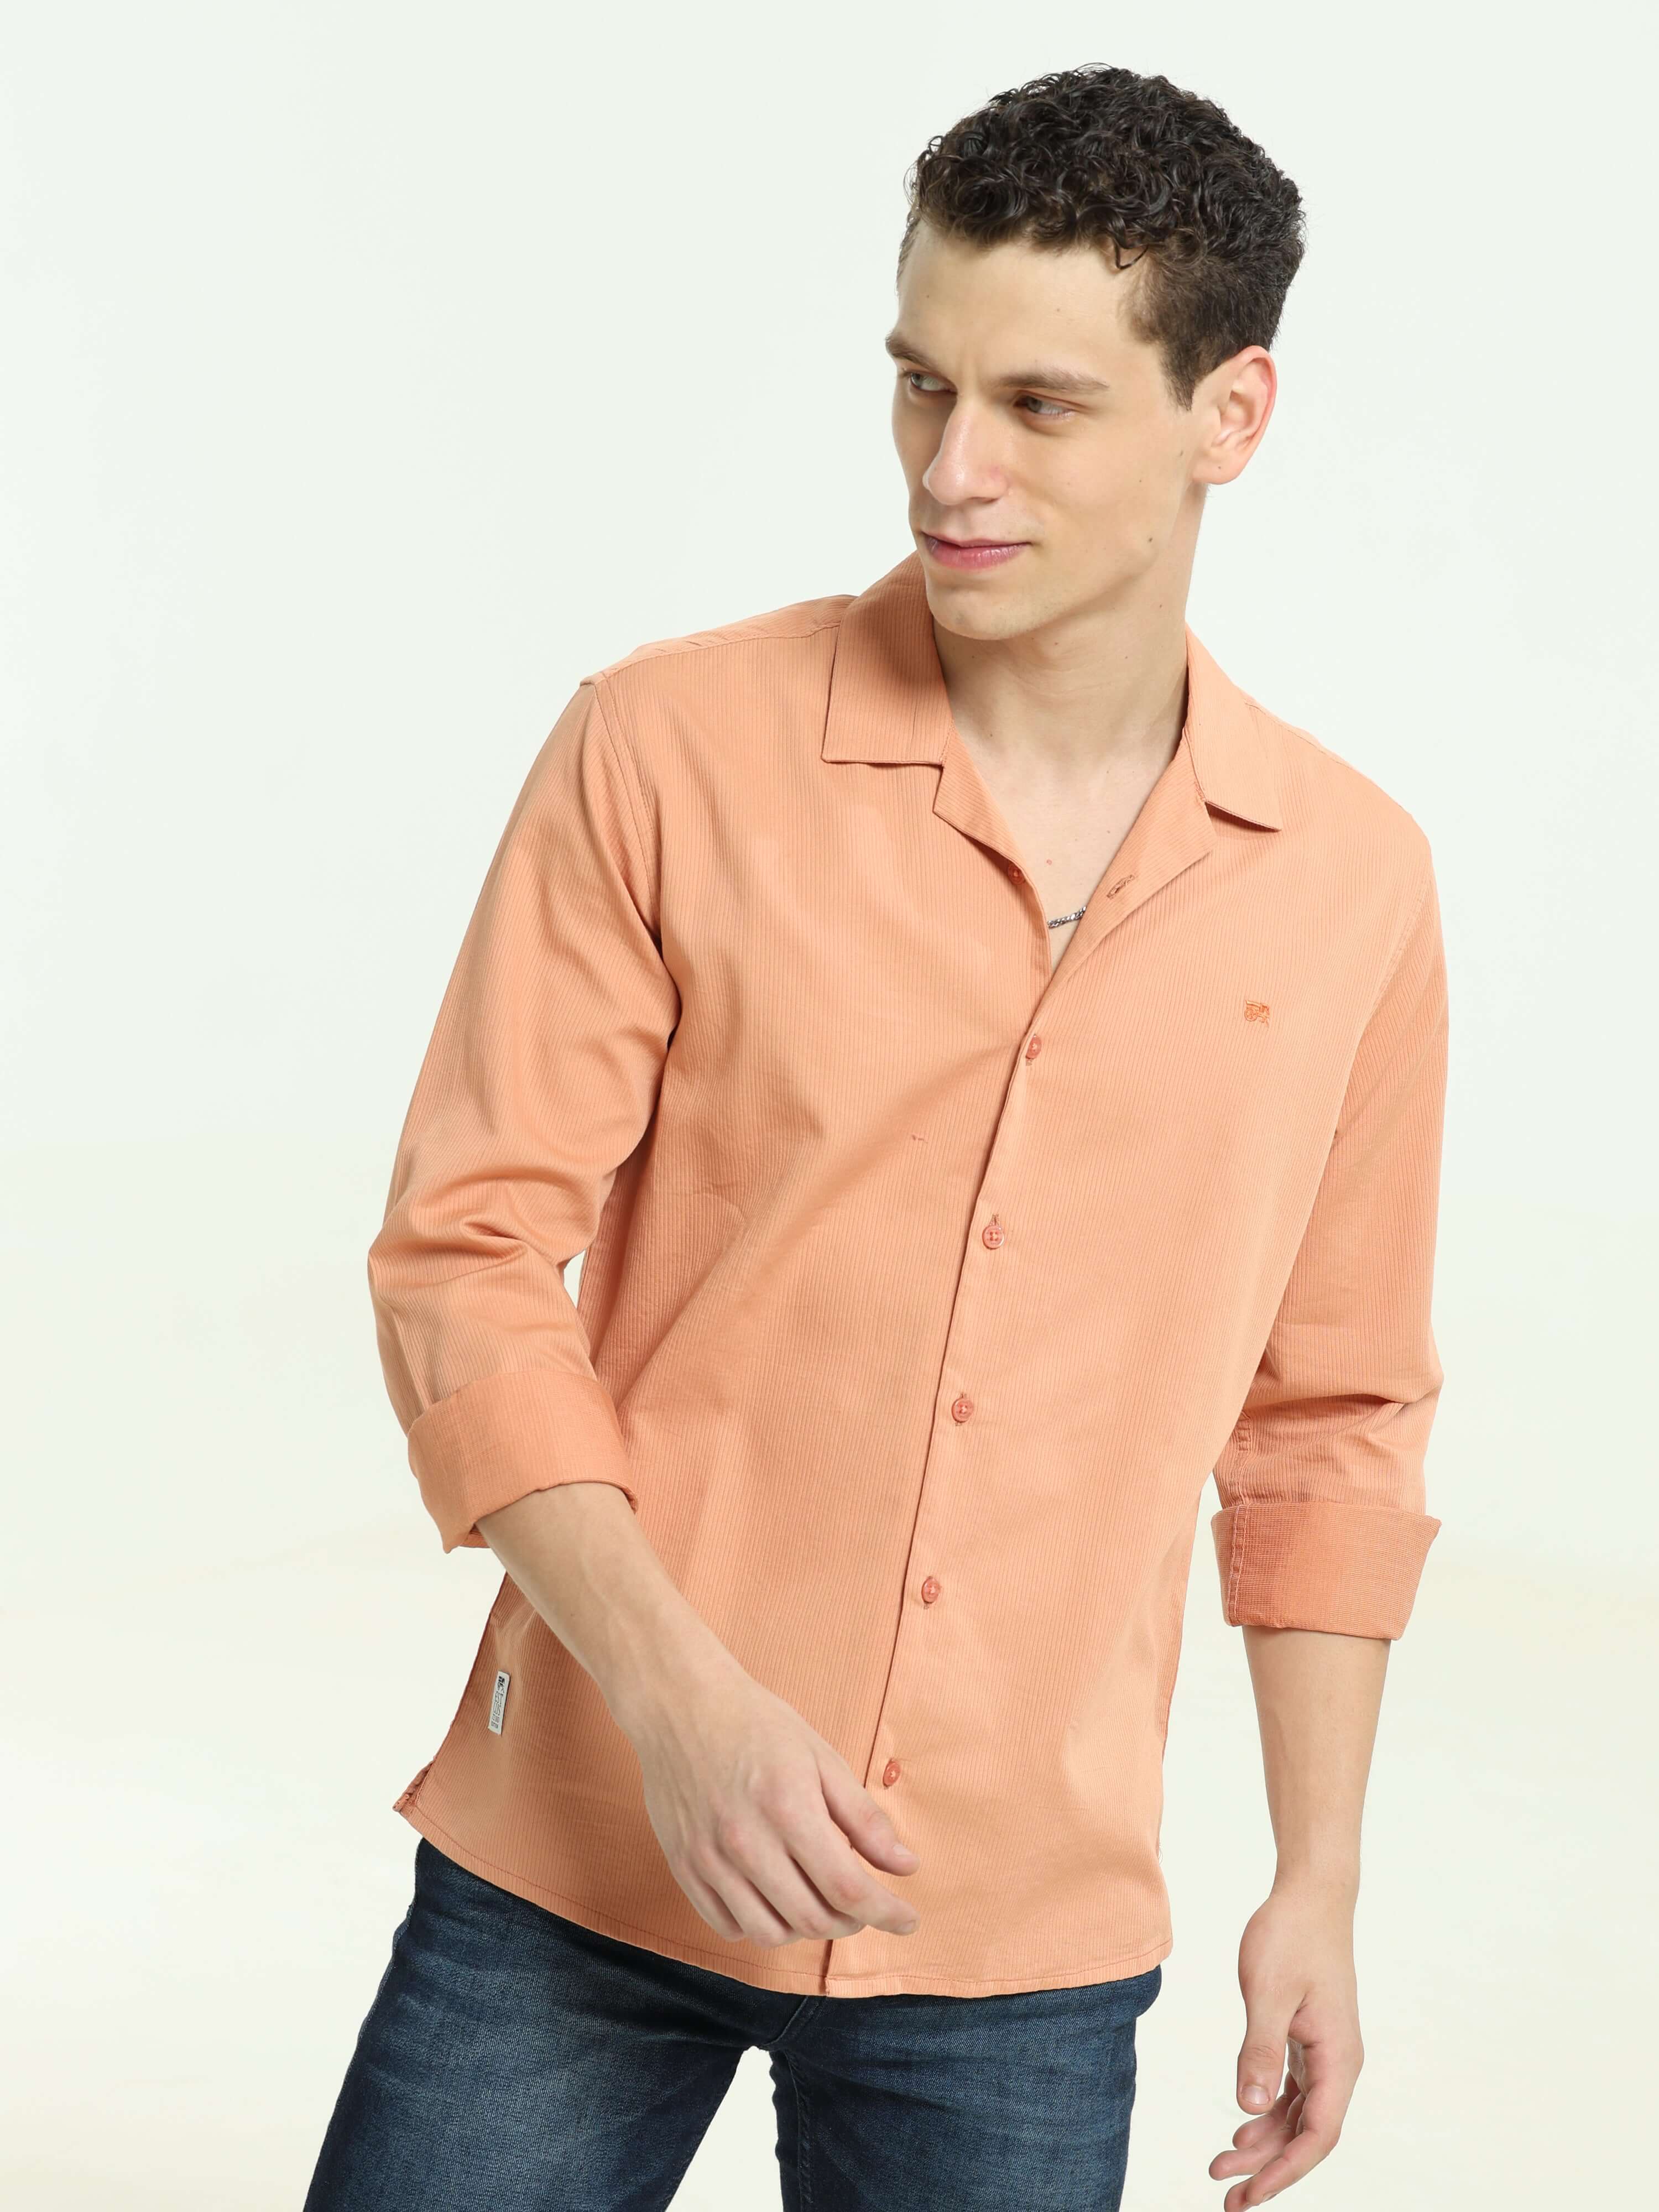 Orange solid cuben colloar shirt shop online at Estilocus. • 100% Cotton , Full-sleeve solid shirt• Cuban collar• Double button edge cuff • Pocketess • Curved bottom hemline . • All double needle construction, finest quality sewing• Machine wash care• Sui